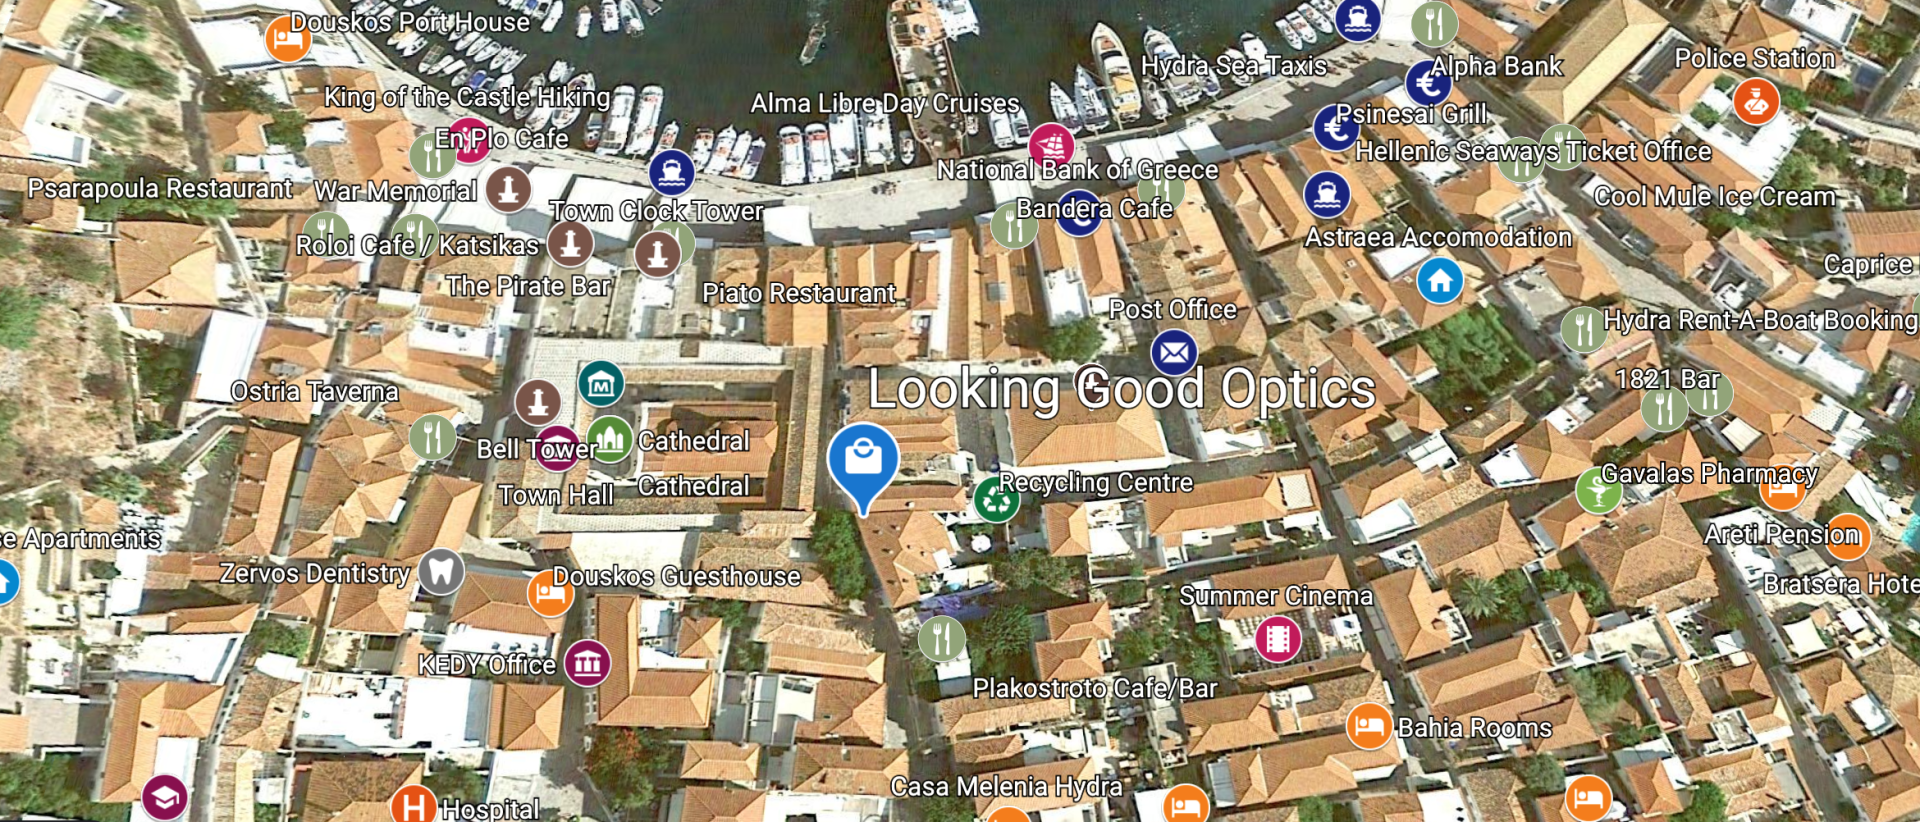 Map to find the Looking Good Optics shop on the Greek Island of Hydra.